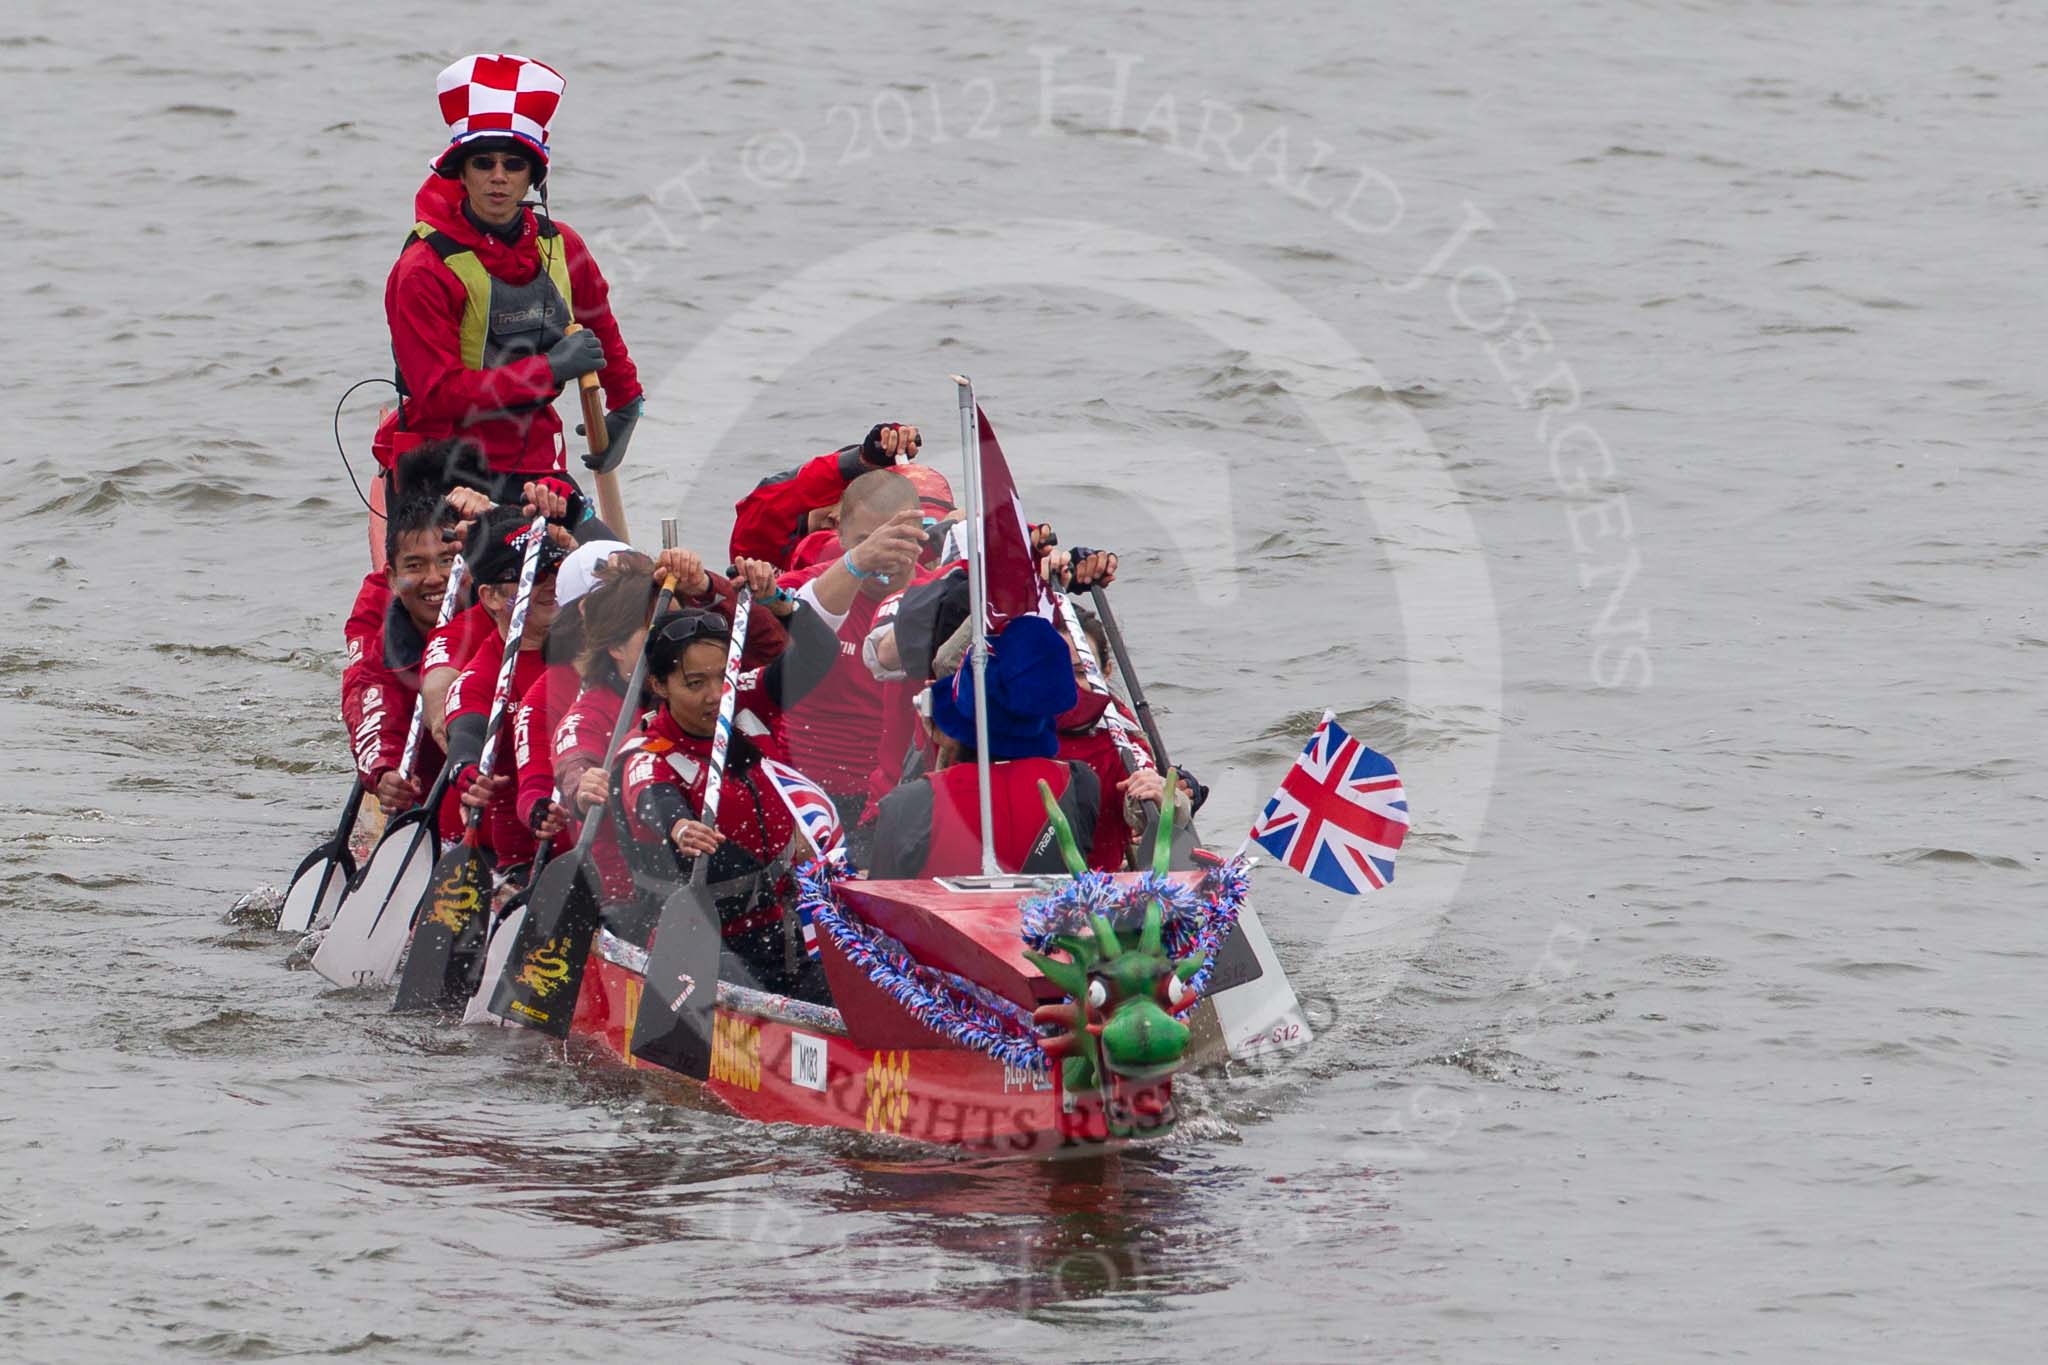 Thames Diamond Jubilee Pageant: DRAGON BOATS-Racing Dragons/Red Lotus (M183)..
River Thames seen from Battersea Bridge,
London,

United Kingdom,
on 03 June 2012 at 14:48, image #131